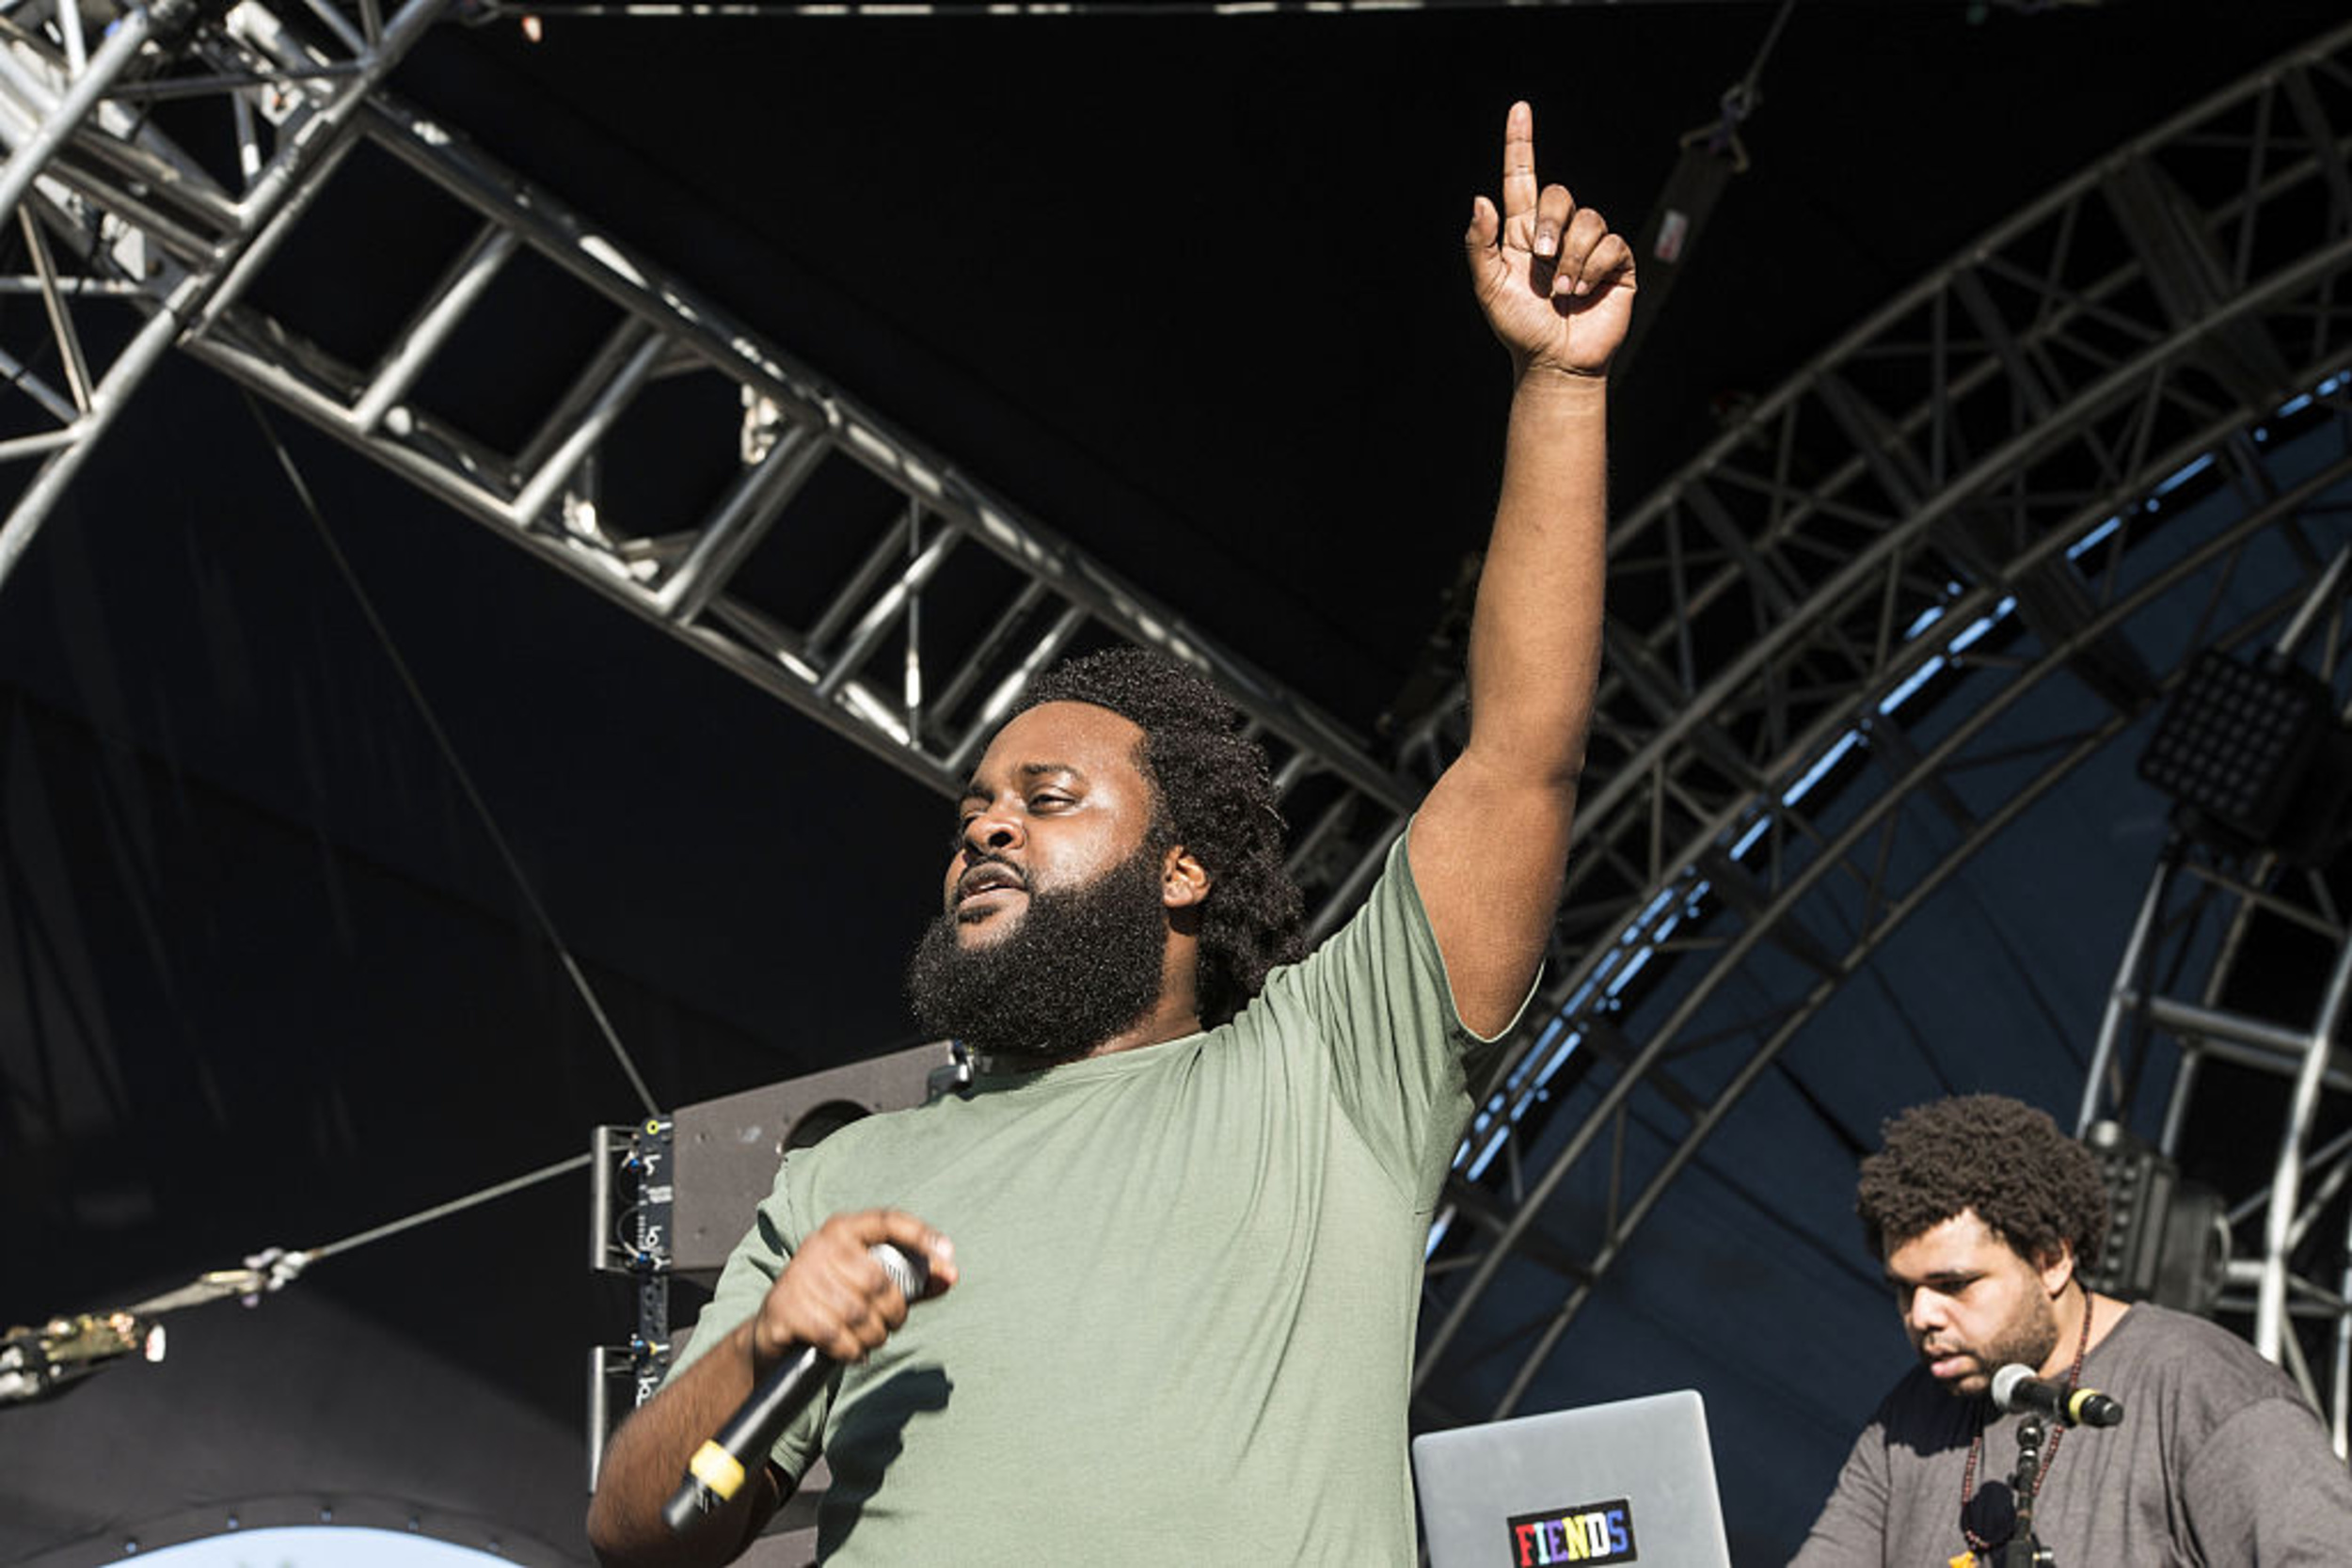 <p>In December 2023, Dreamville artist Bas released his long-awaited fourth album <em>We Only Talk About Real S—t  When We’re F—d  Up</em> which featured several collaborations alongside J. Cole, Amaarae, Adekunle Gold, and more. To help support the album, Bas is taking his music on the road with a 23-city North America tour. Bas will begin the tour on March 3rd in Dallas and wrap up on April 9th in New York. </p><p>You may also like: <a href='https://www.yardbarker.com/entertainment/articles/the_20_scariest_moments_in_non_horror_movies/s1__40030459'>The 20 scariest moments in non-horror movies</a></p>